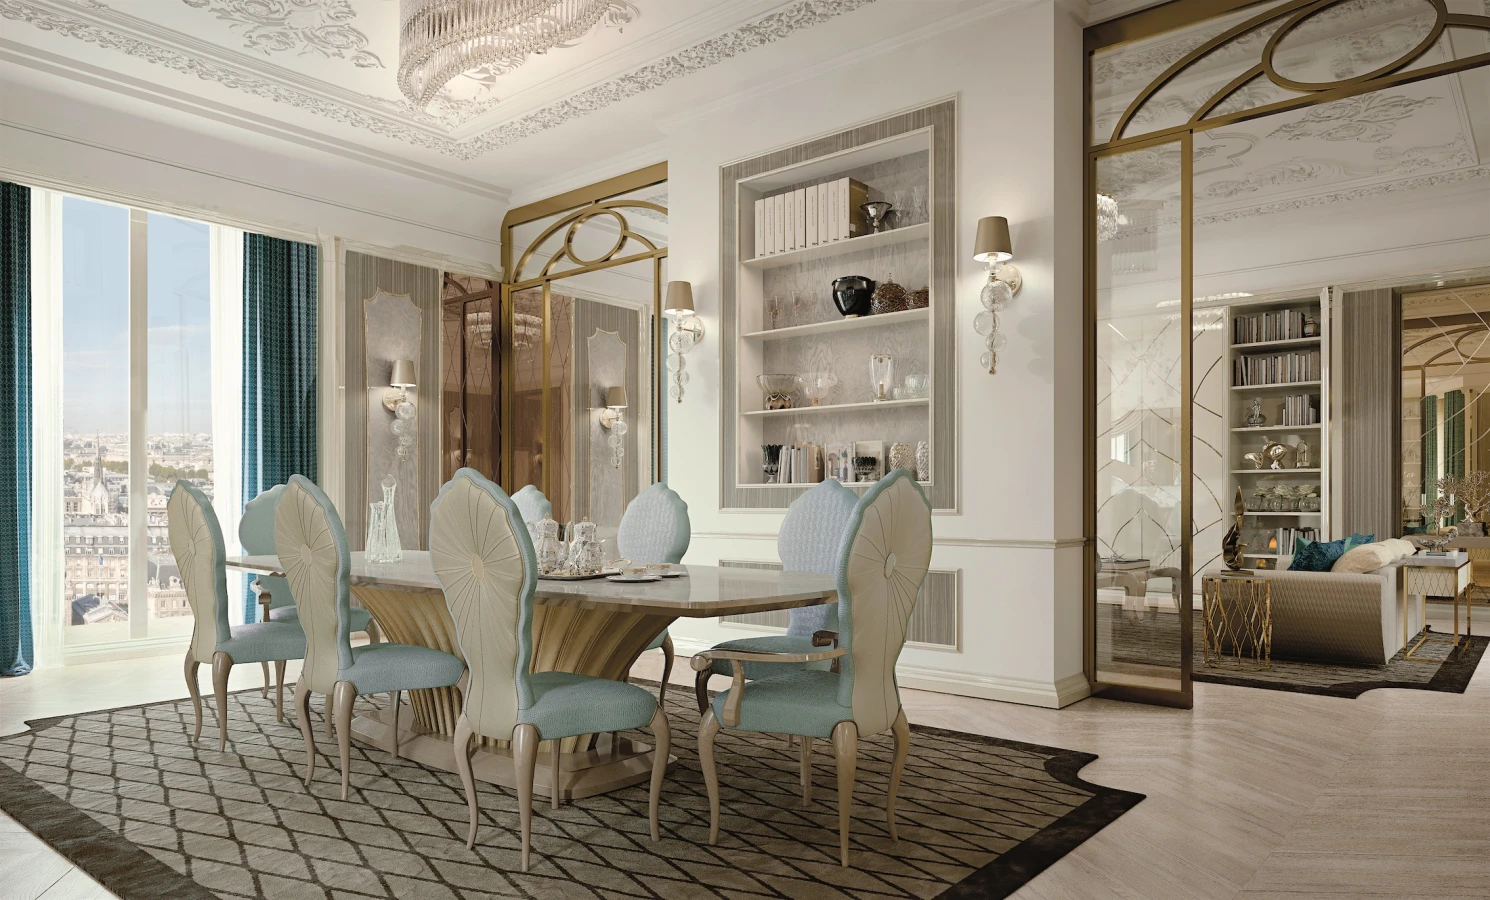 Made in Italy contemporary soft classic dining room furniture for stylish apartments